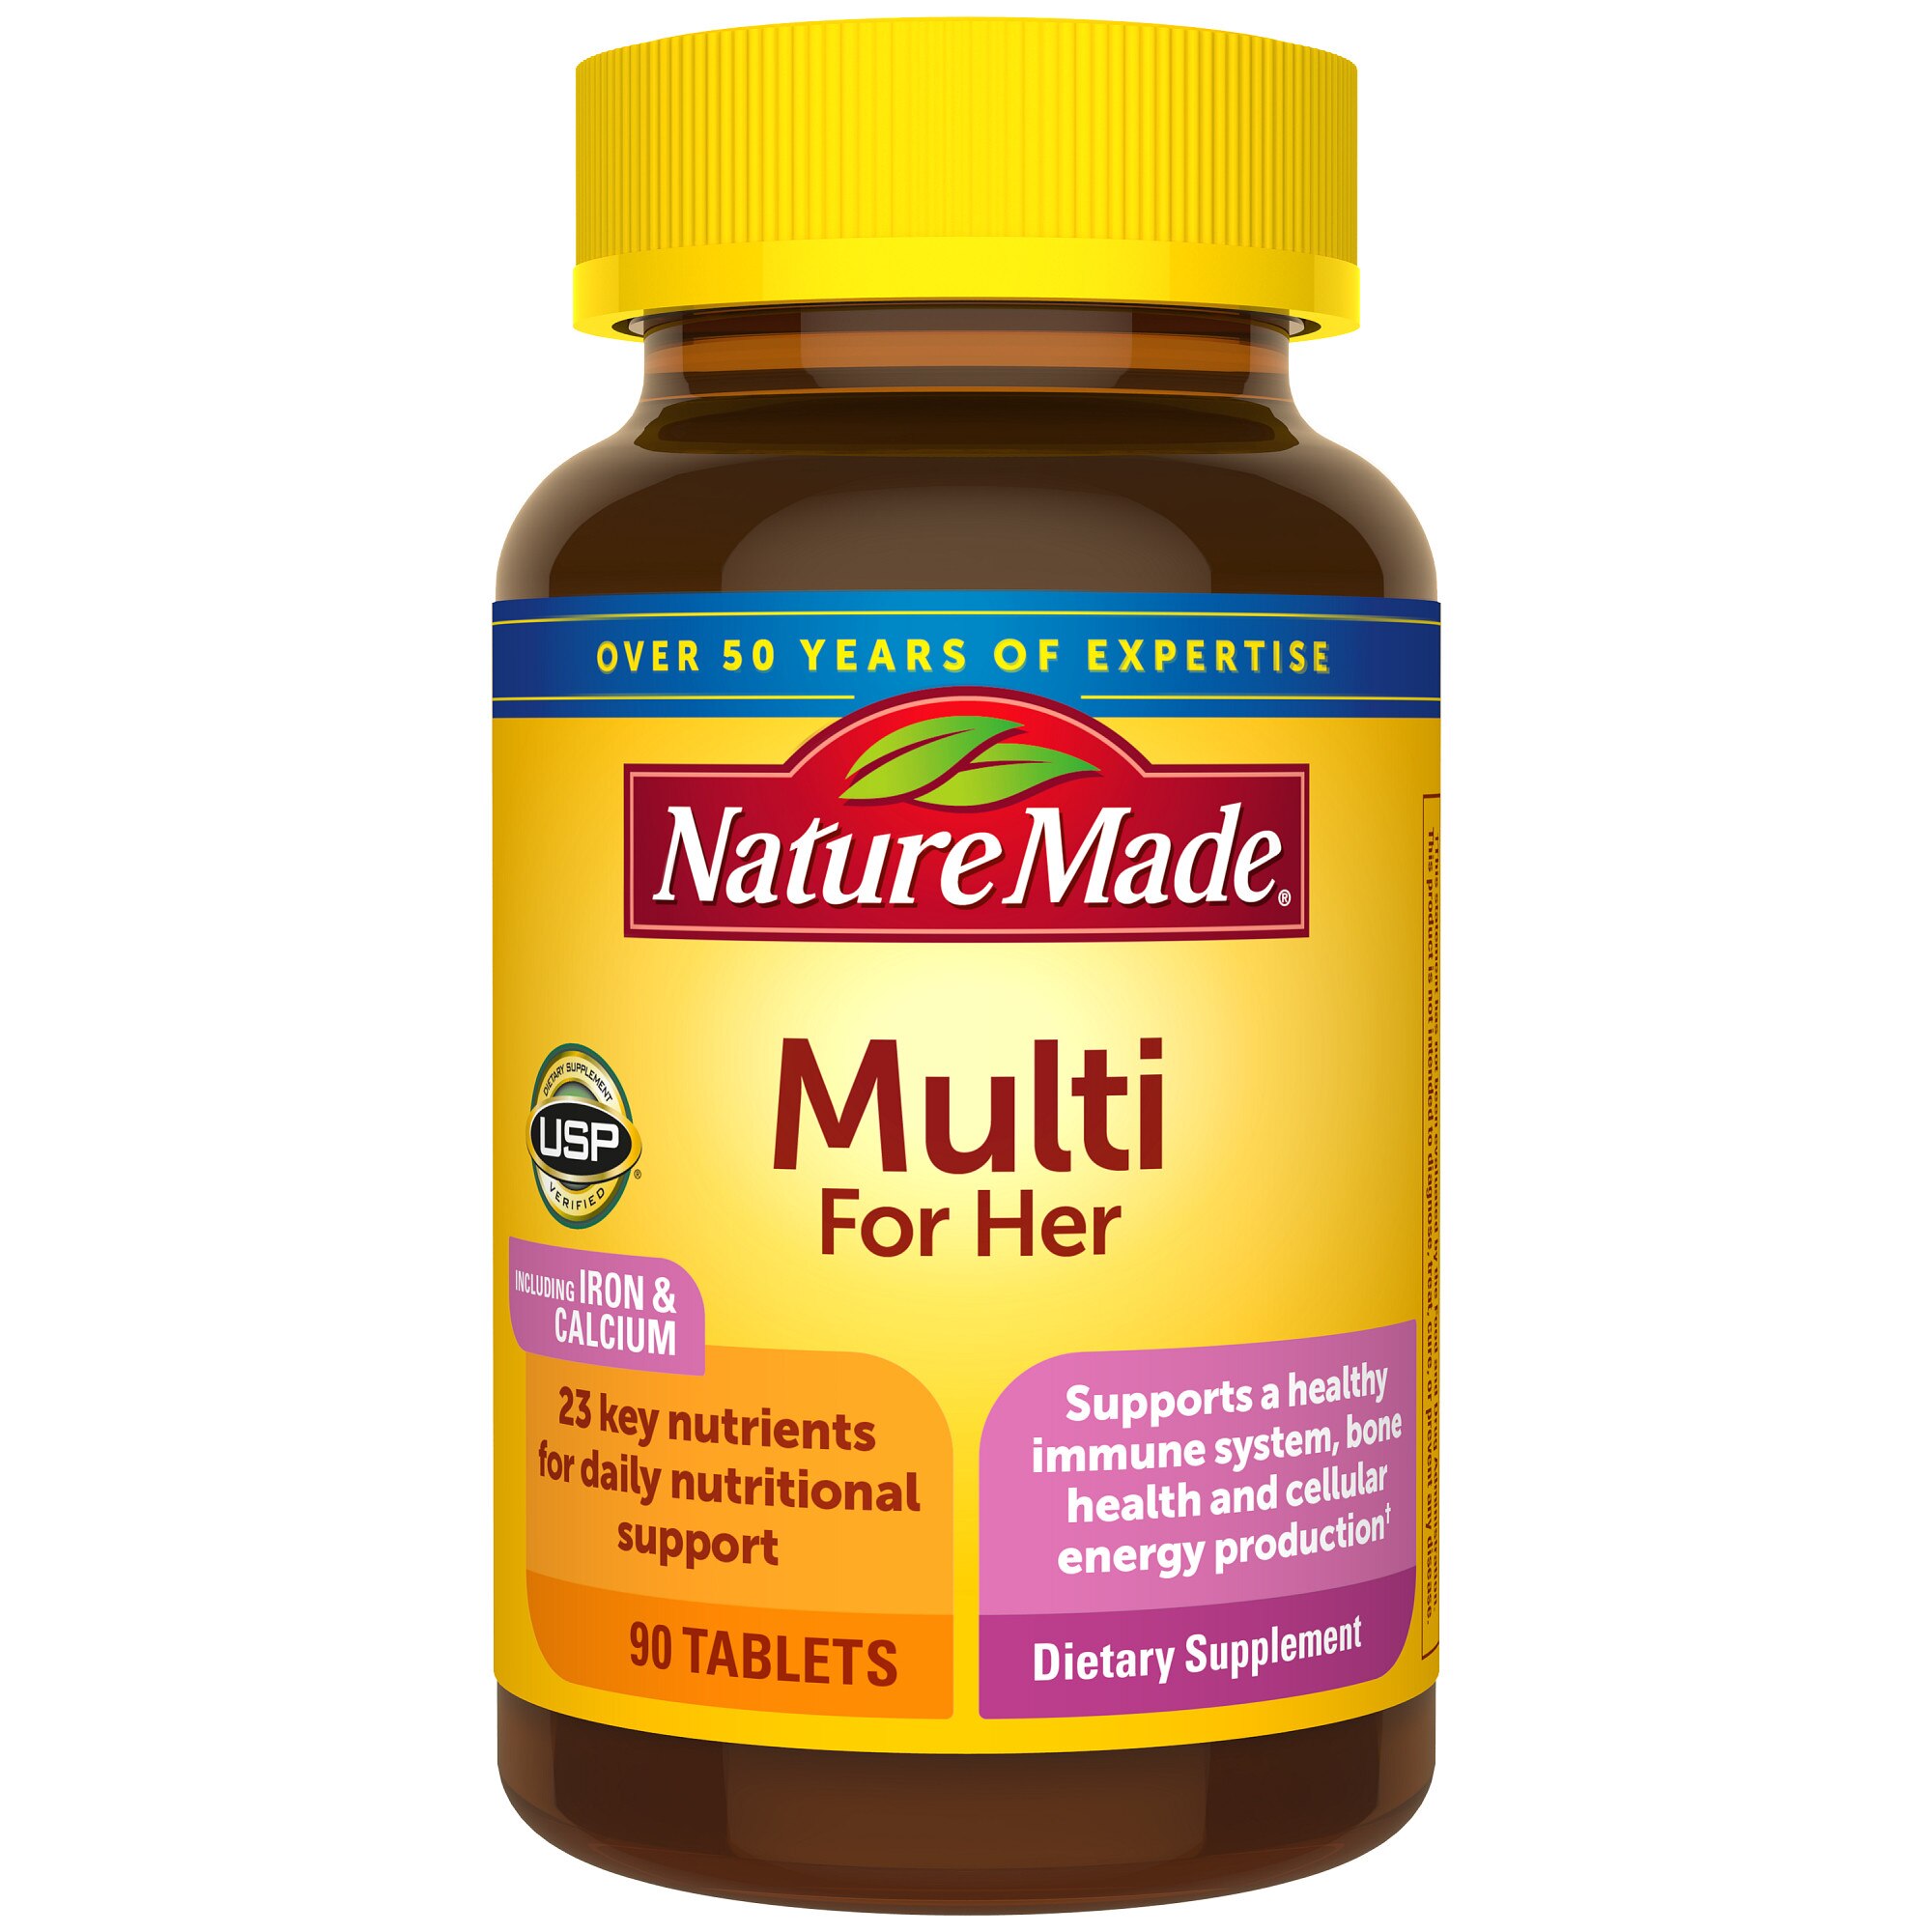 Nature Made Women's Multivitamin Tablets, 90 CT